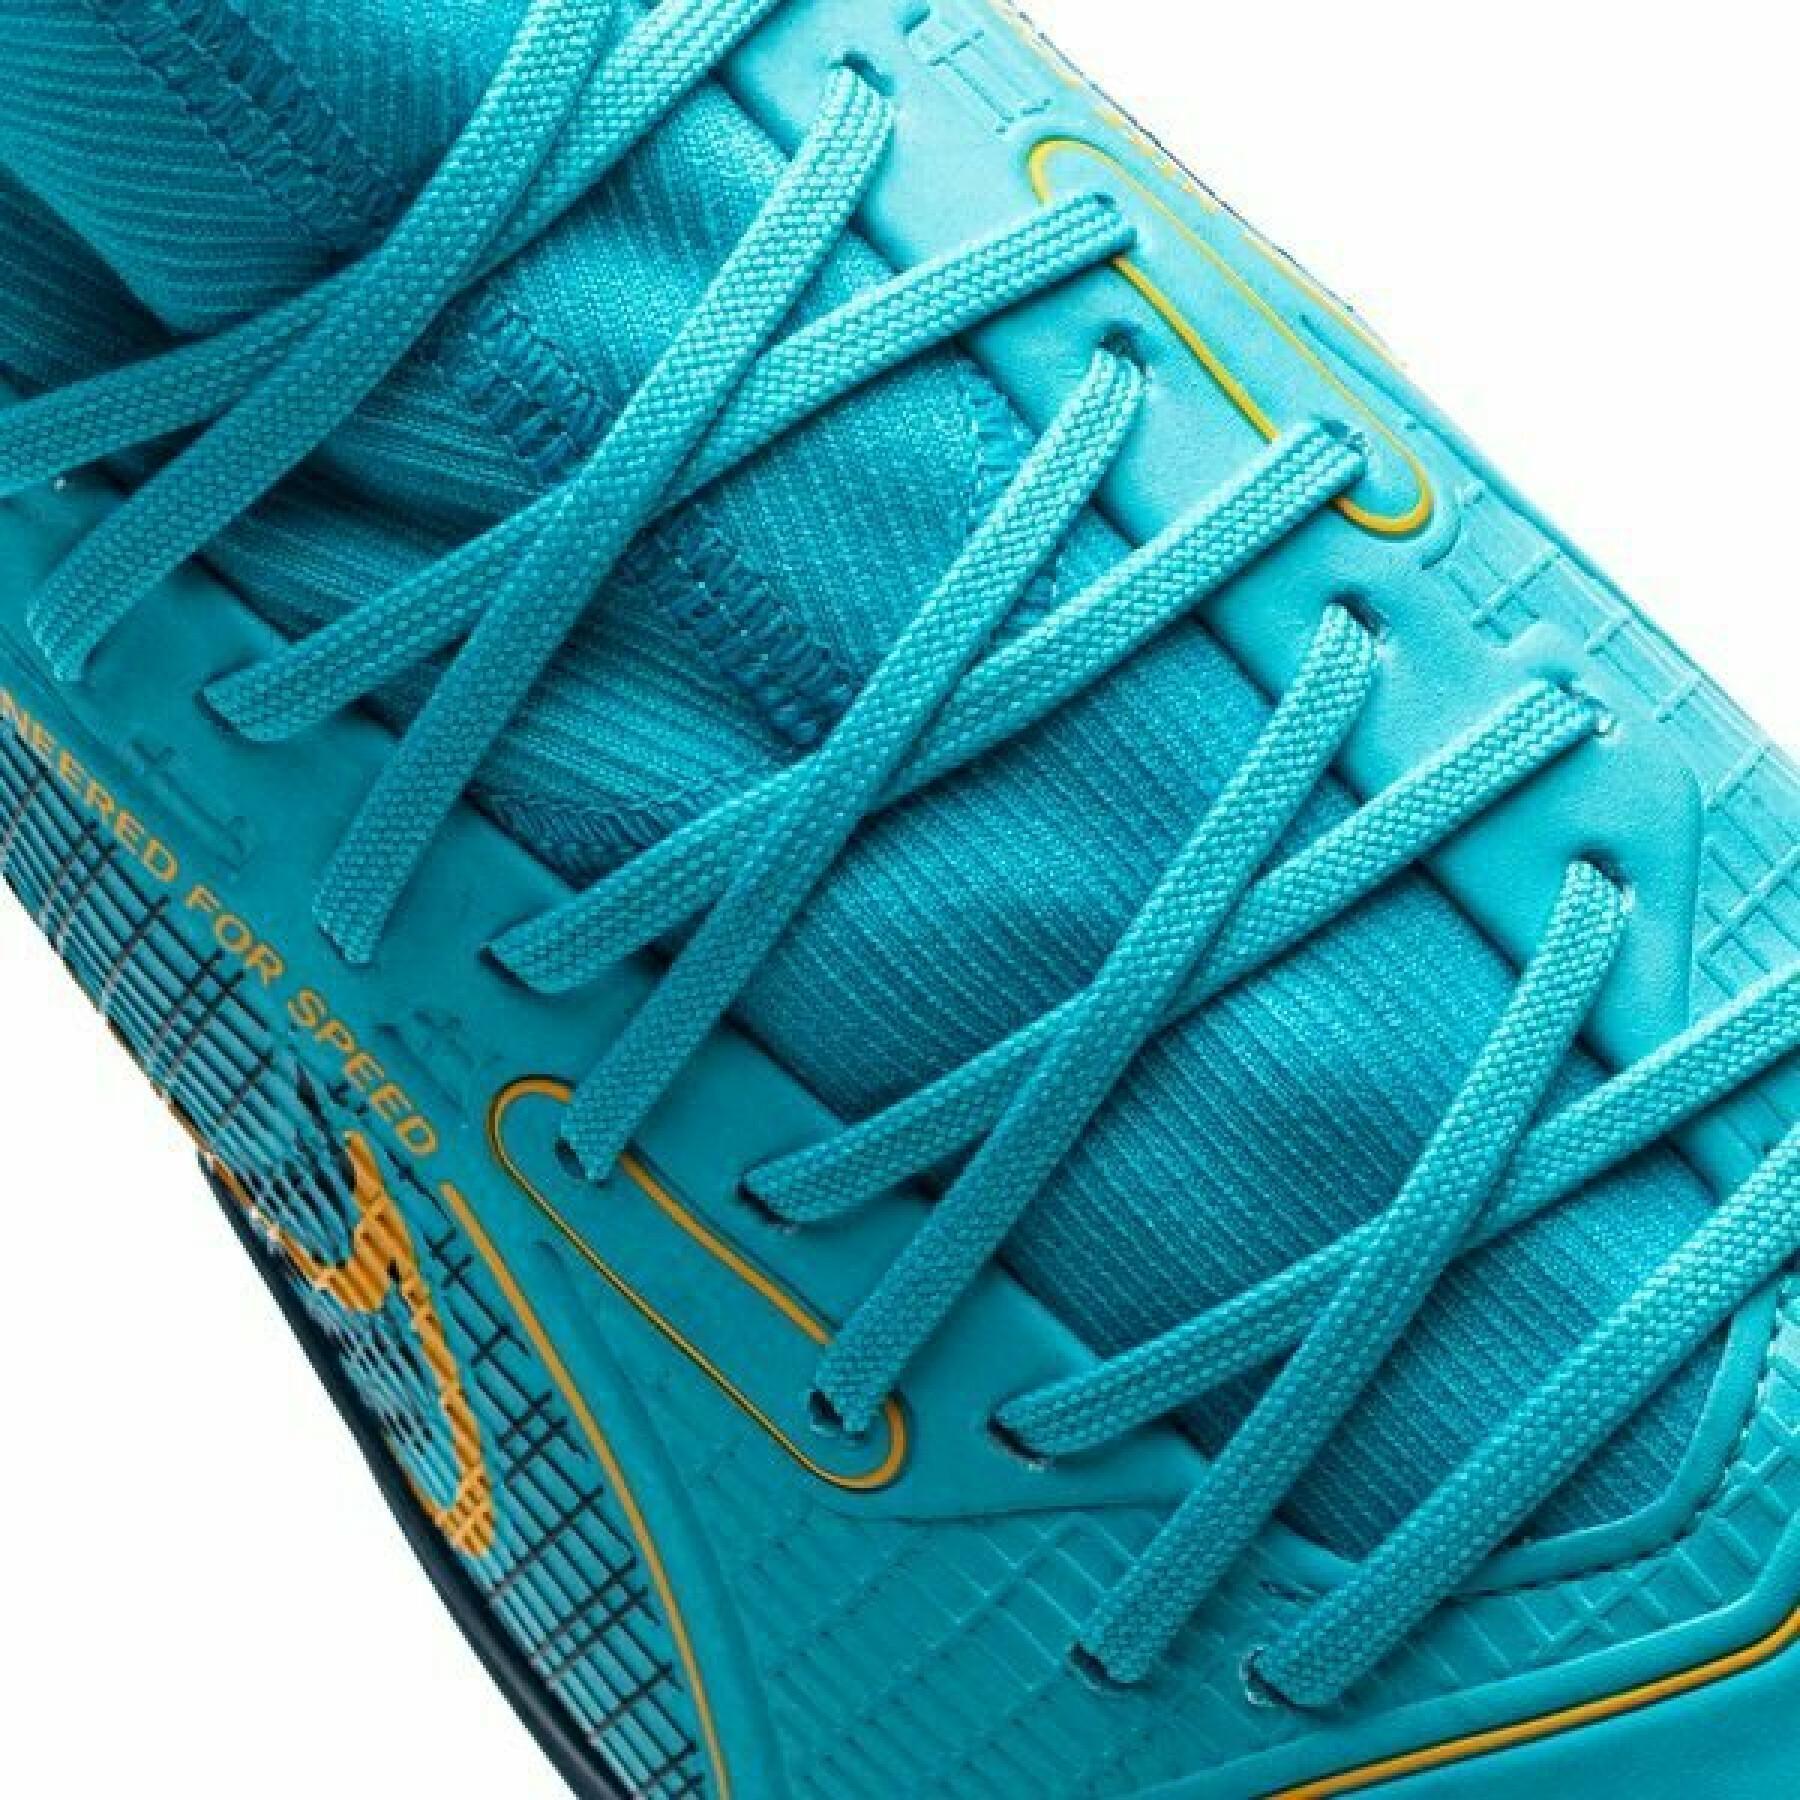 Chaussures de football Nike Superfly 8 Academy IC -Blueprint Pack